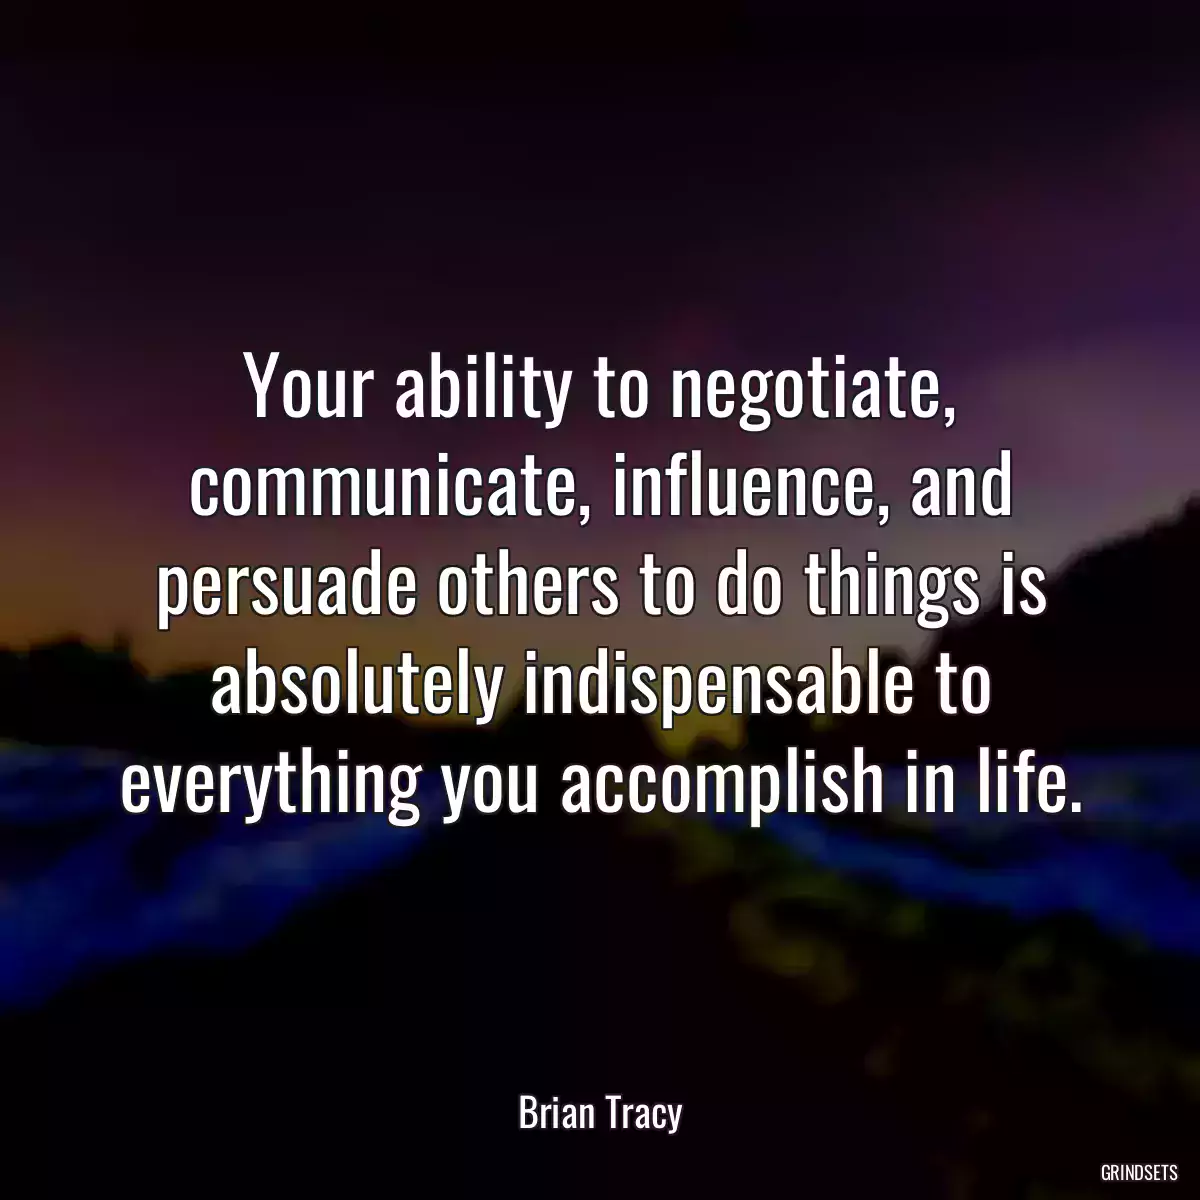 Your ability to negotiate, communicate, influence, and persuade others to do things is absolutely indispensable to everything you accomplish in life.